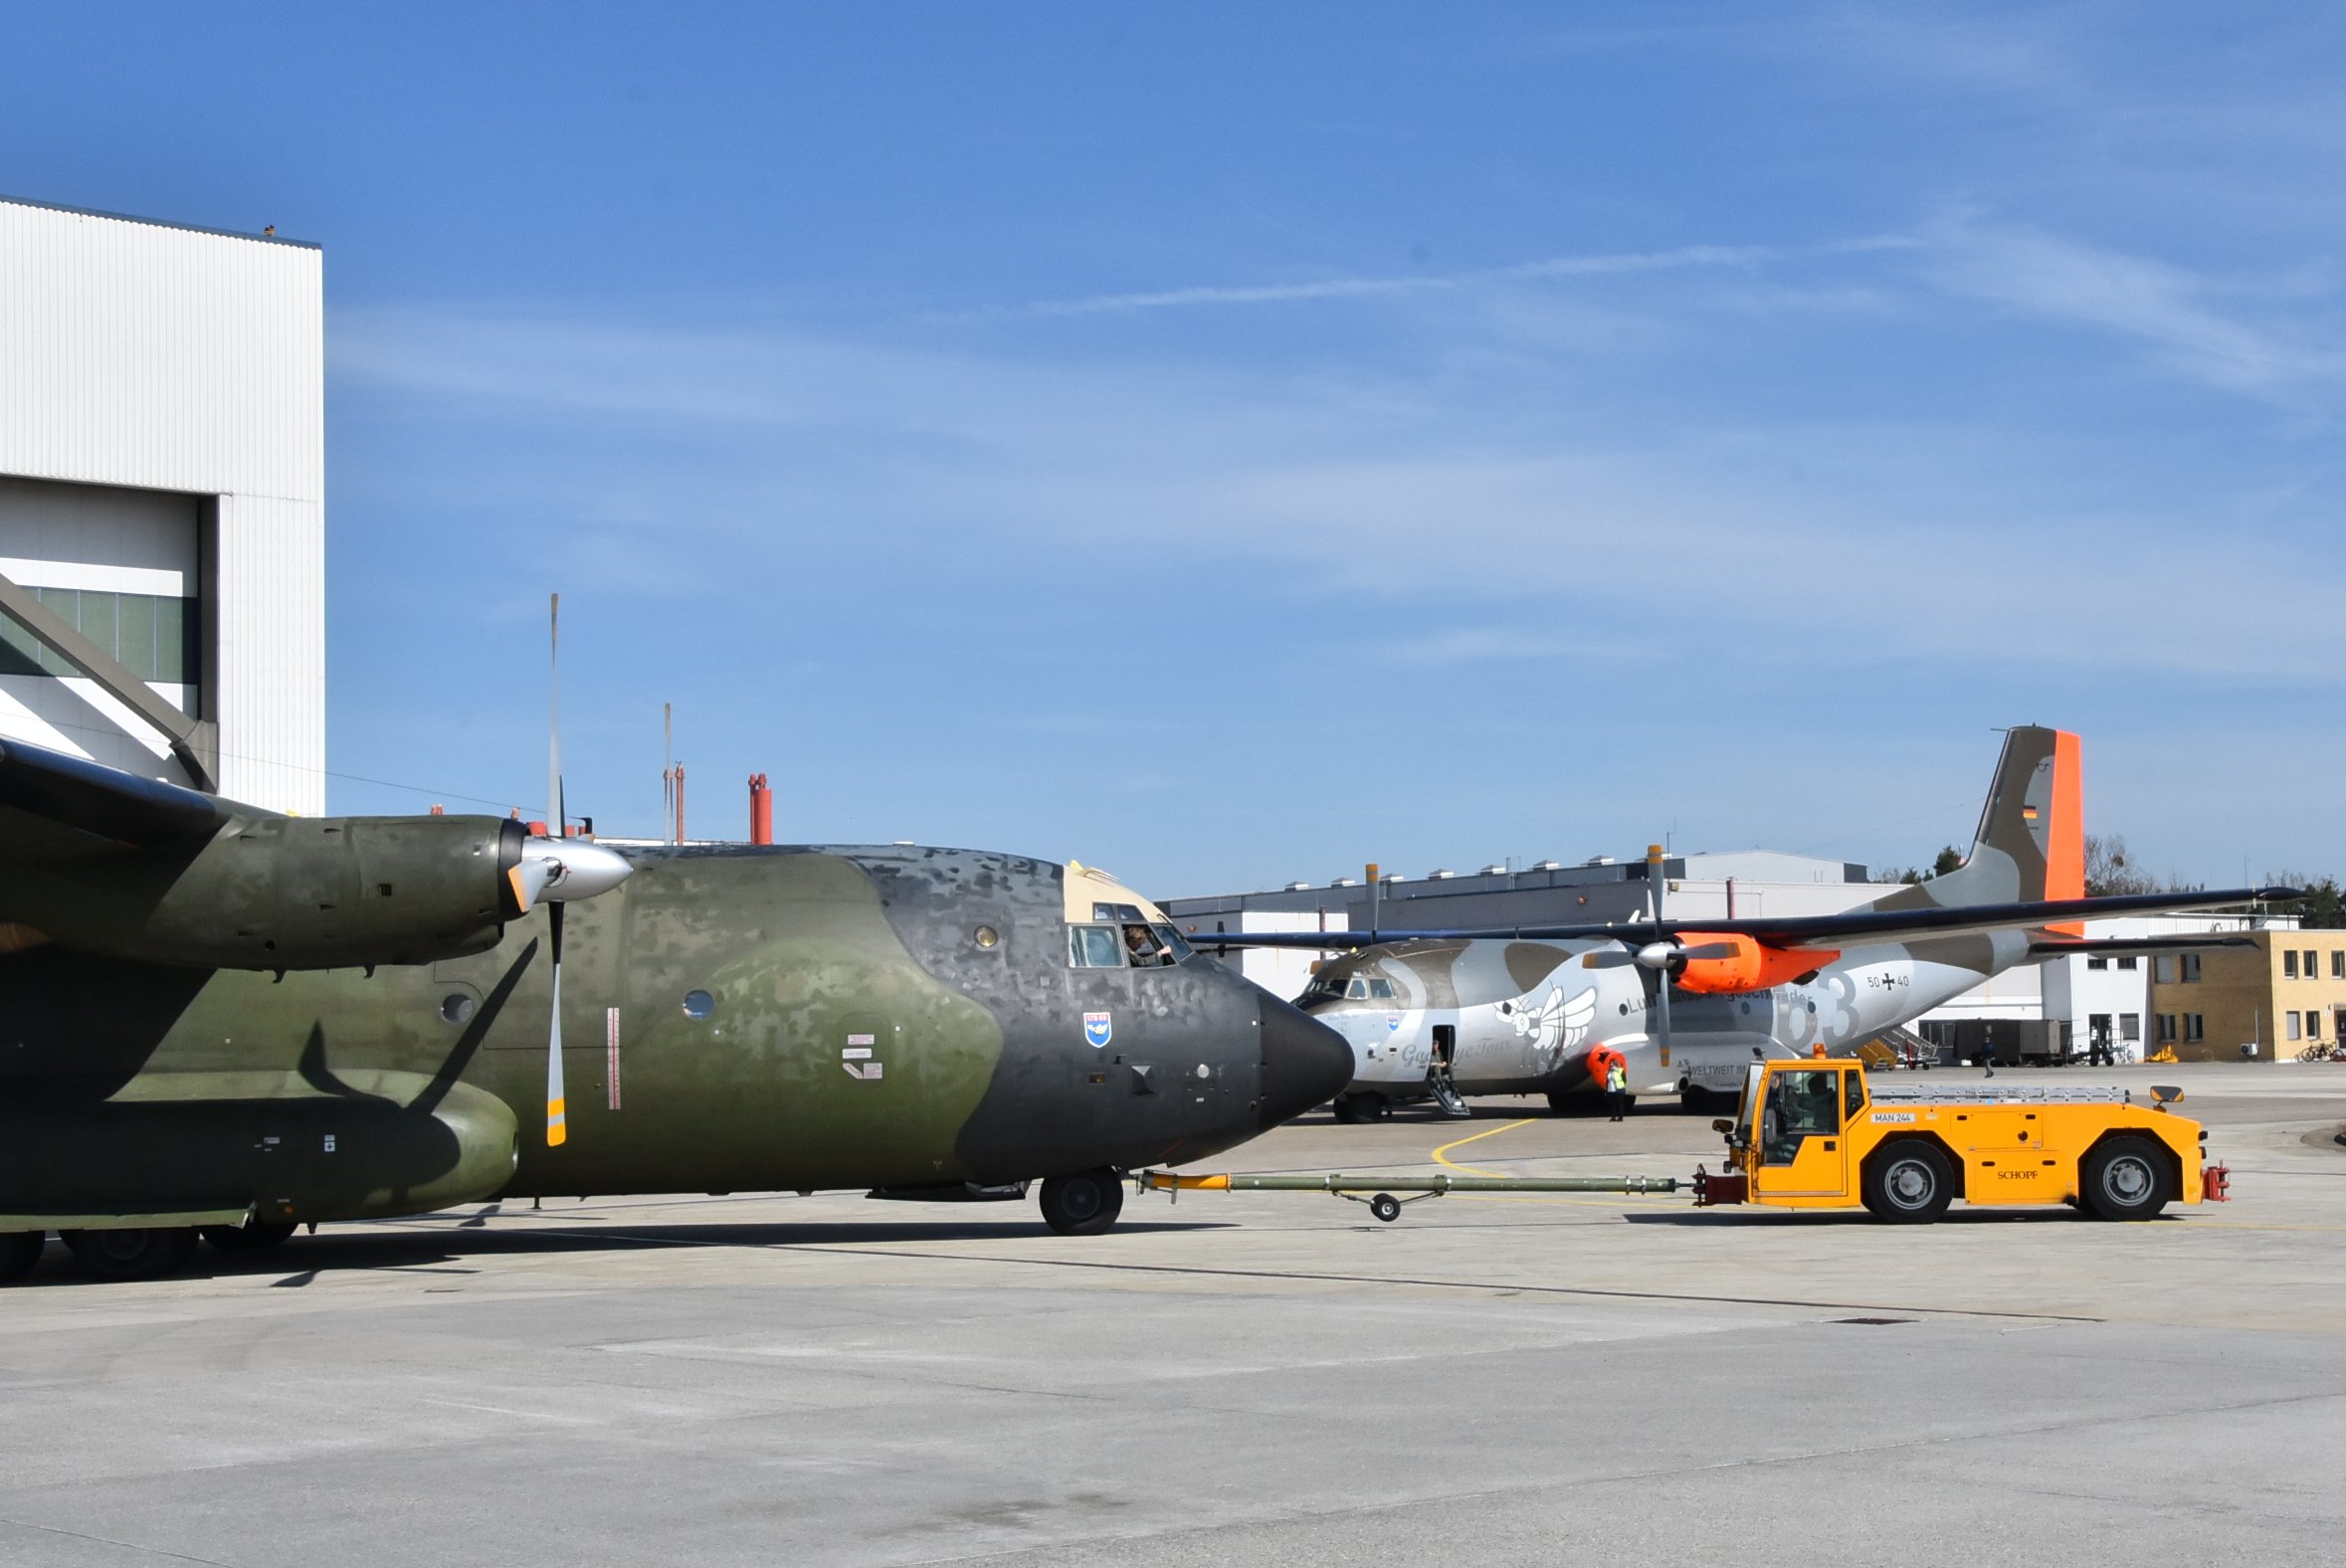 Airbus Delivers Last Overhauled C-160 Transall to German Air Force